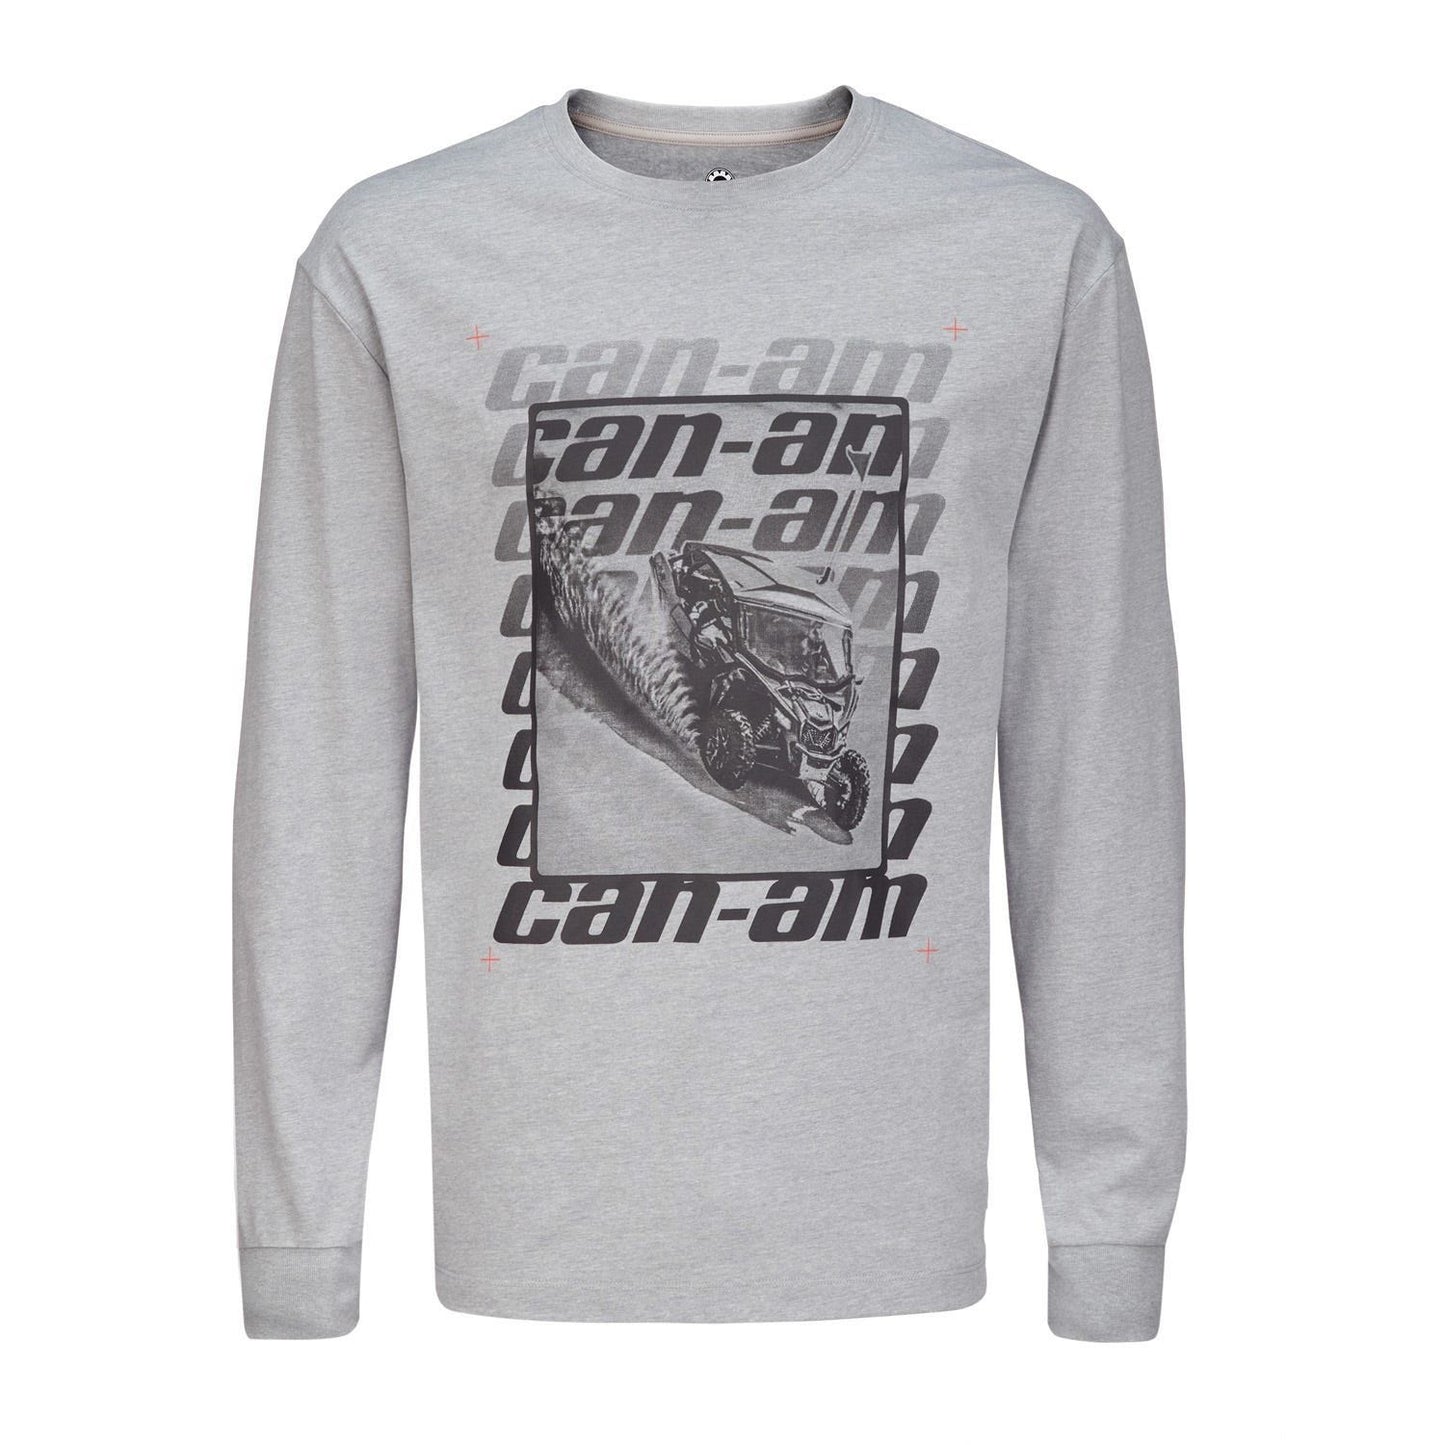 CAN-AM UNDISPUTED LONG SLEEVES T-SHIRT